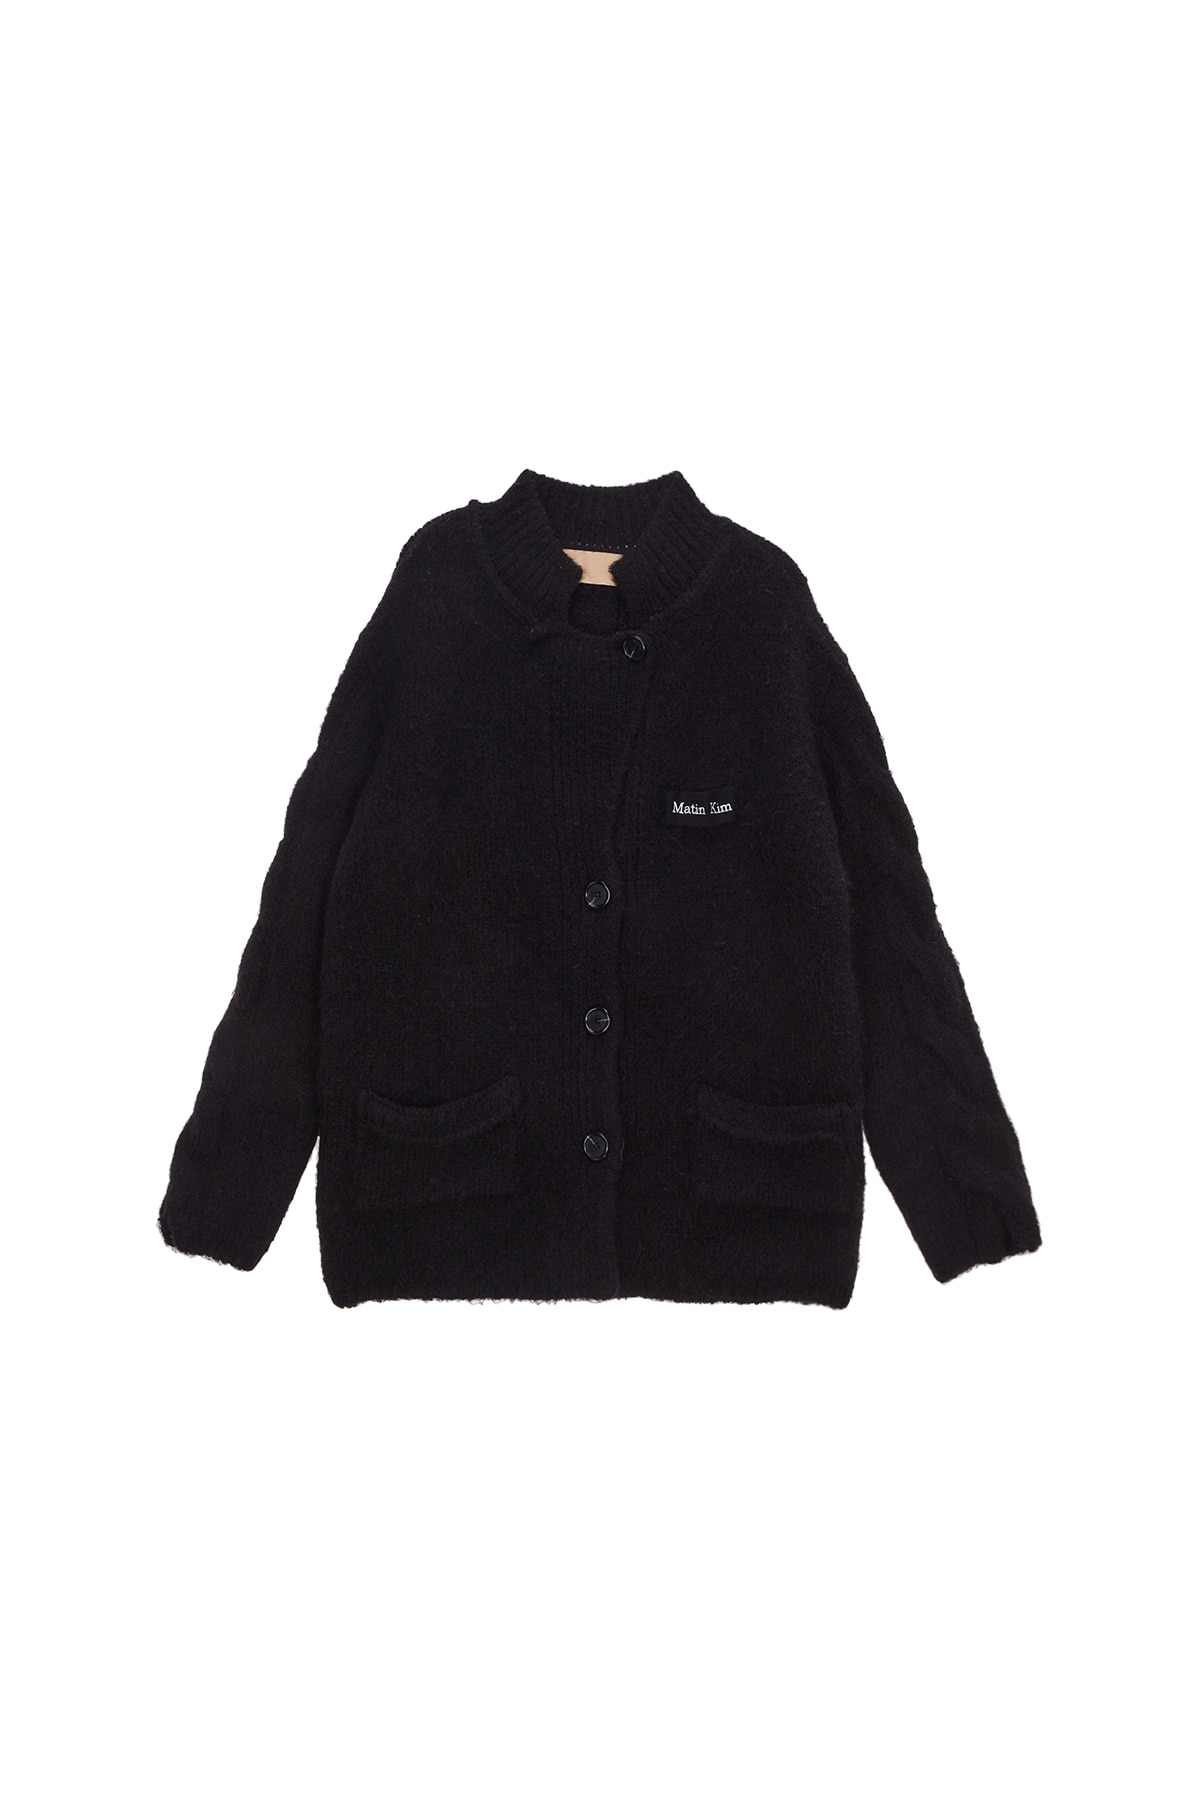 LOGO PATCHED KNIT CARDIGAN IN BLACK